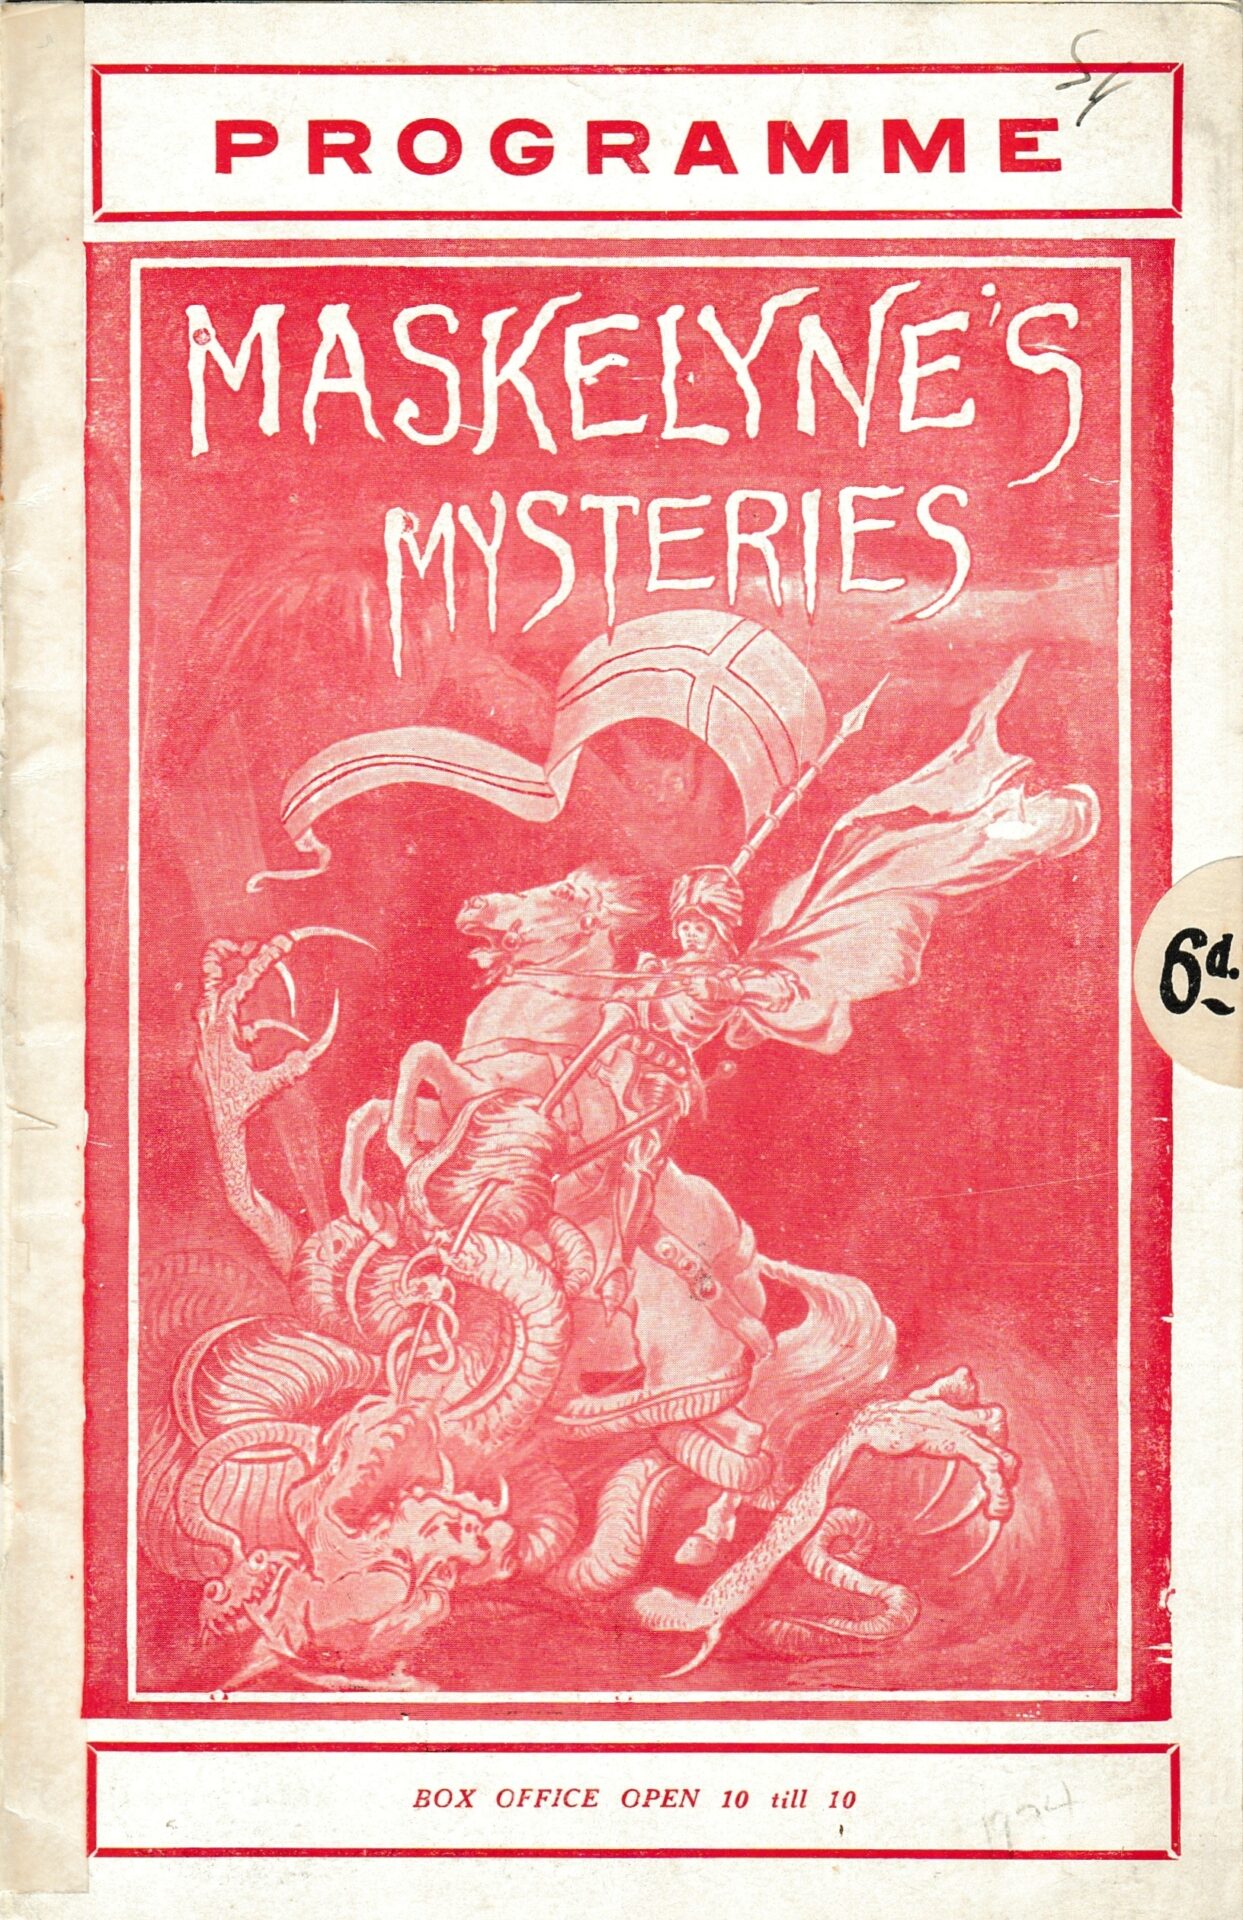 The Little Theatre presents Maskelyne’s Mysteries, 13 August 1934